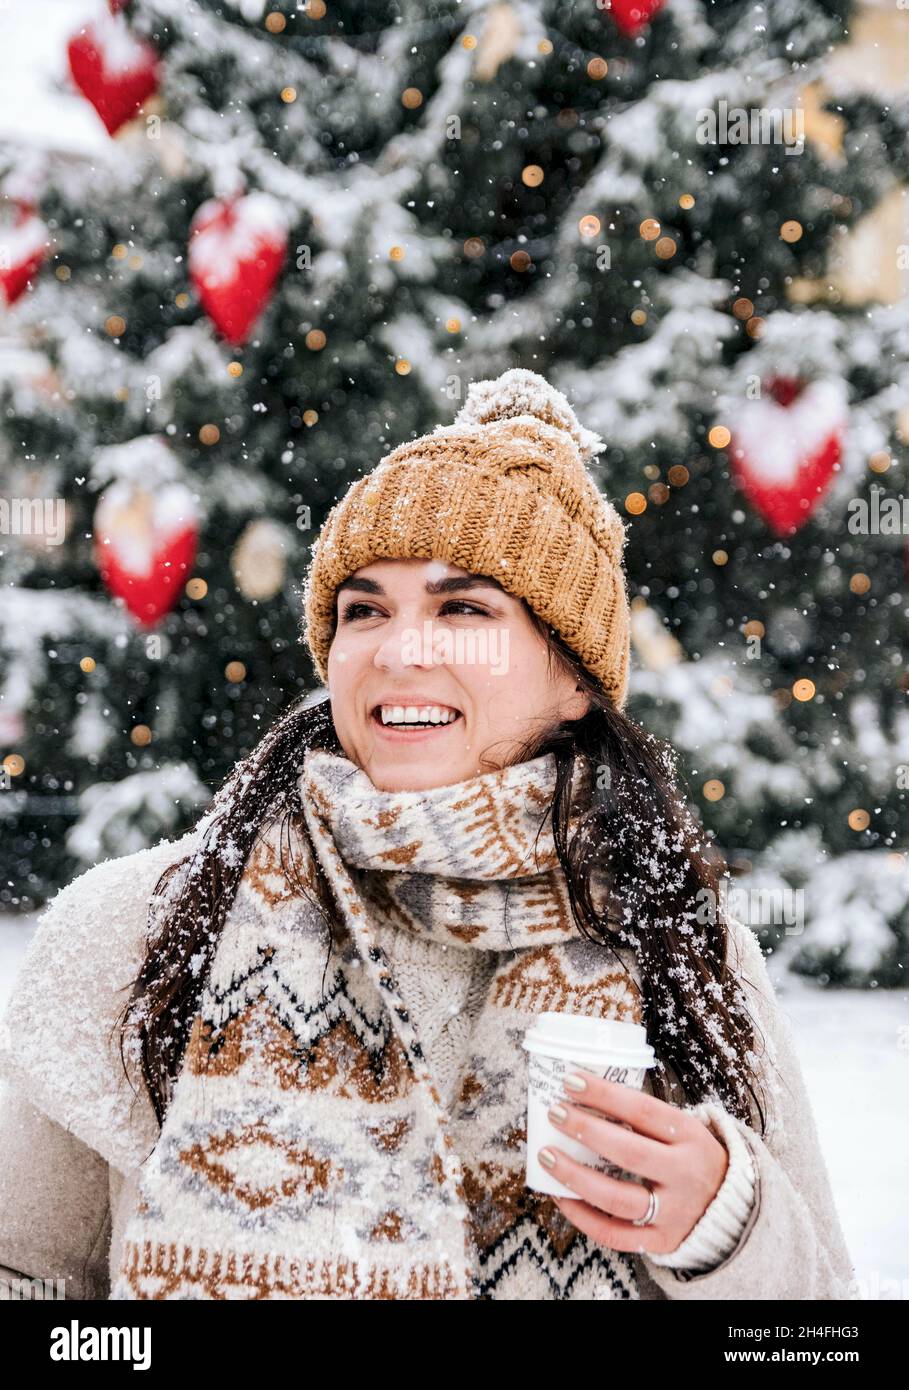 https://c8.alamy.com/comp/2H4FHG3/portrait-of-a-young-woman-wearing-stylish-winter-clothes-on-snowy-day-in-city-drinking-coffee-to-go-2H4FHG3.jpg